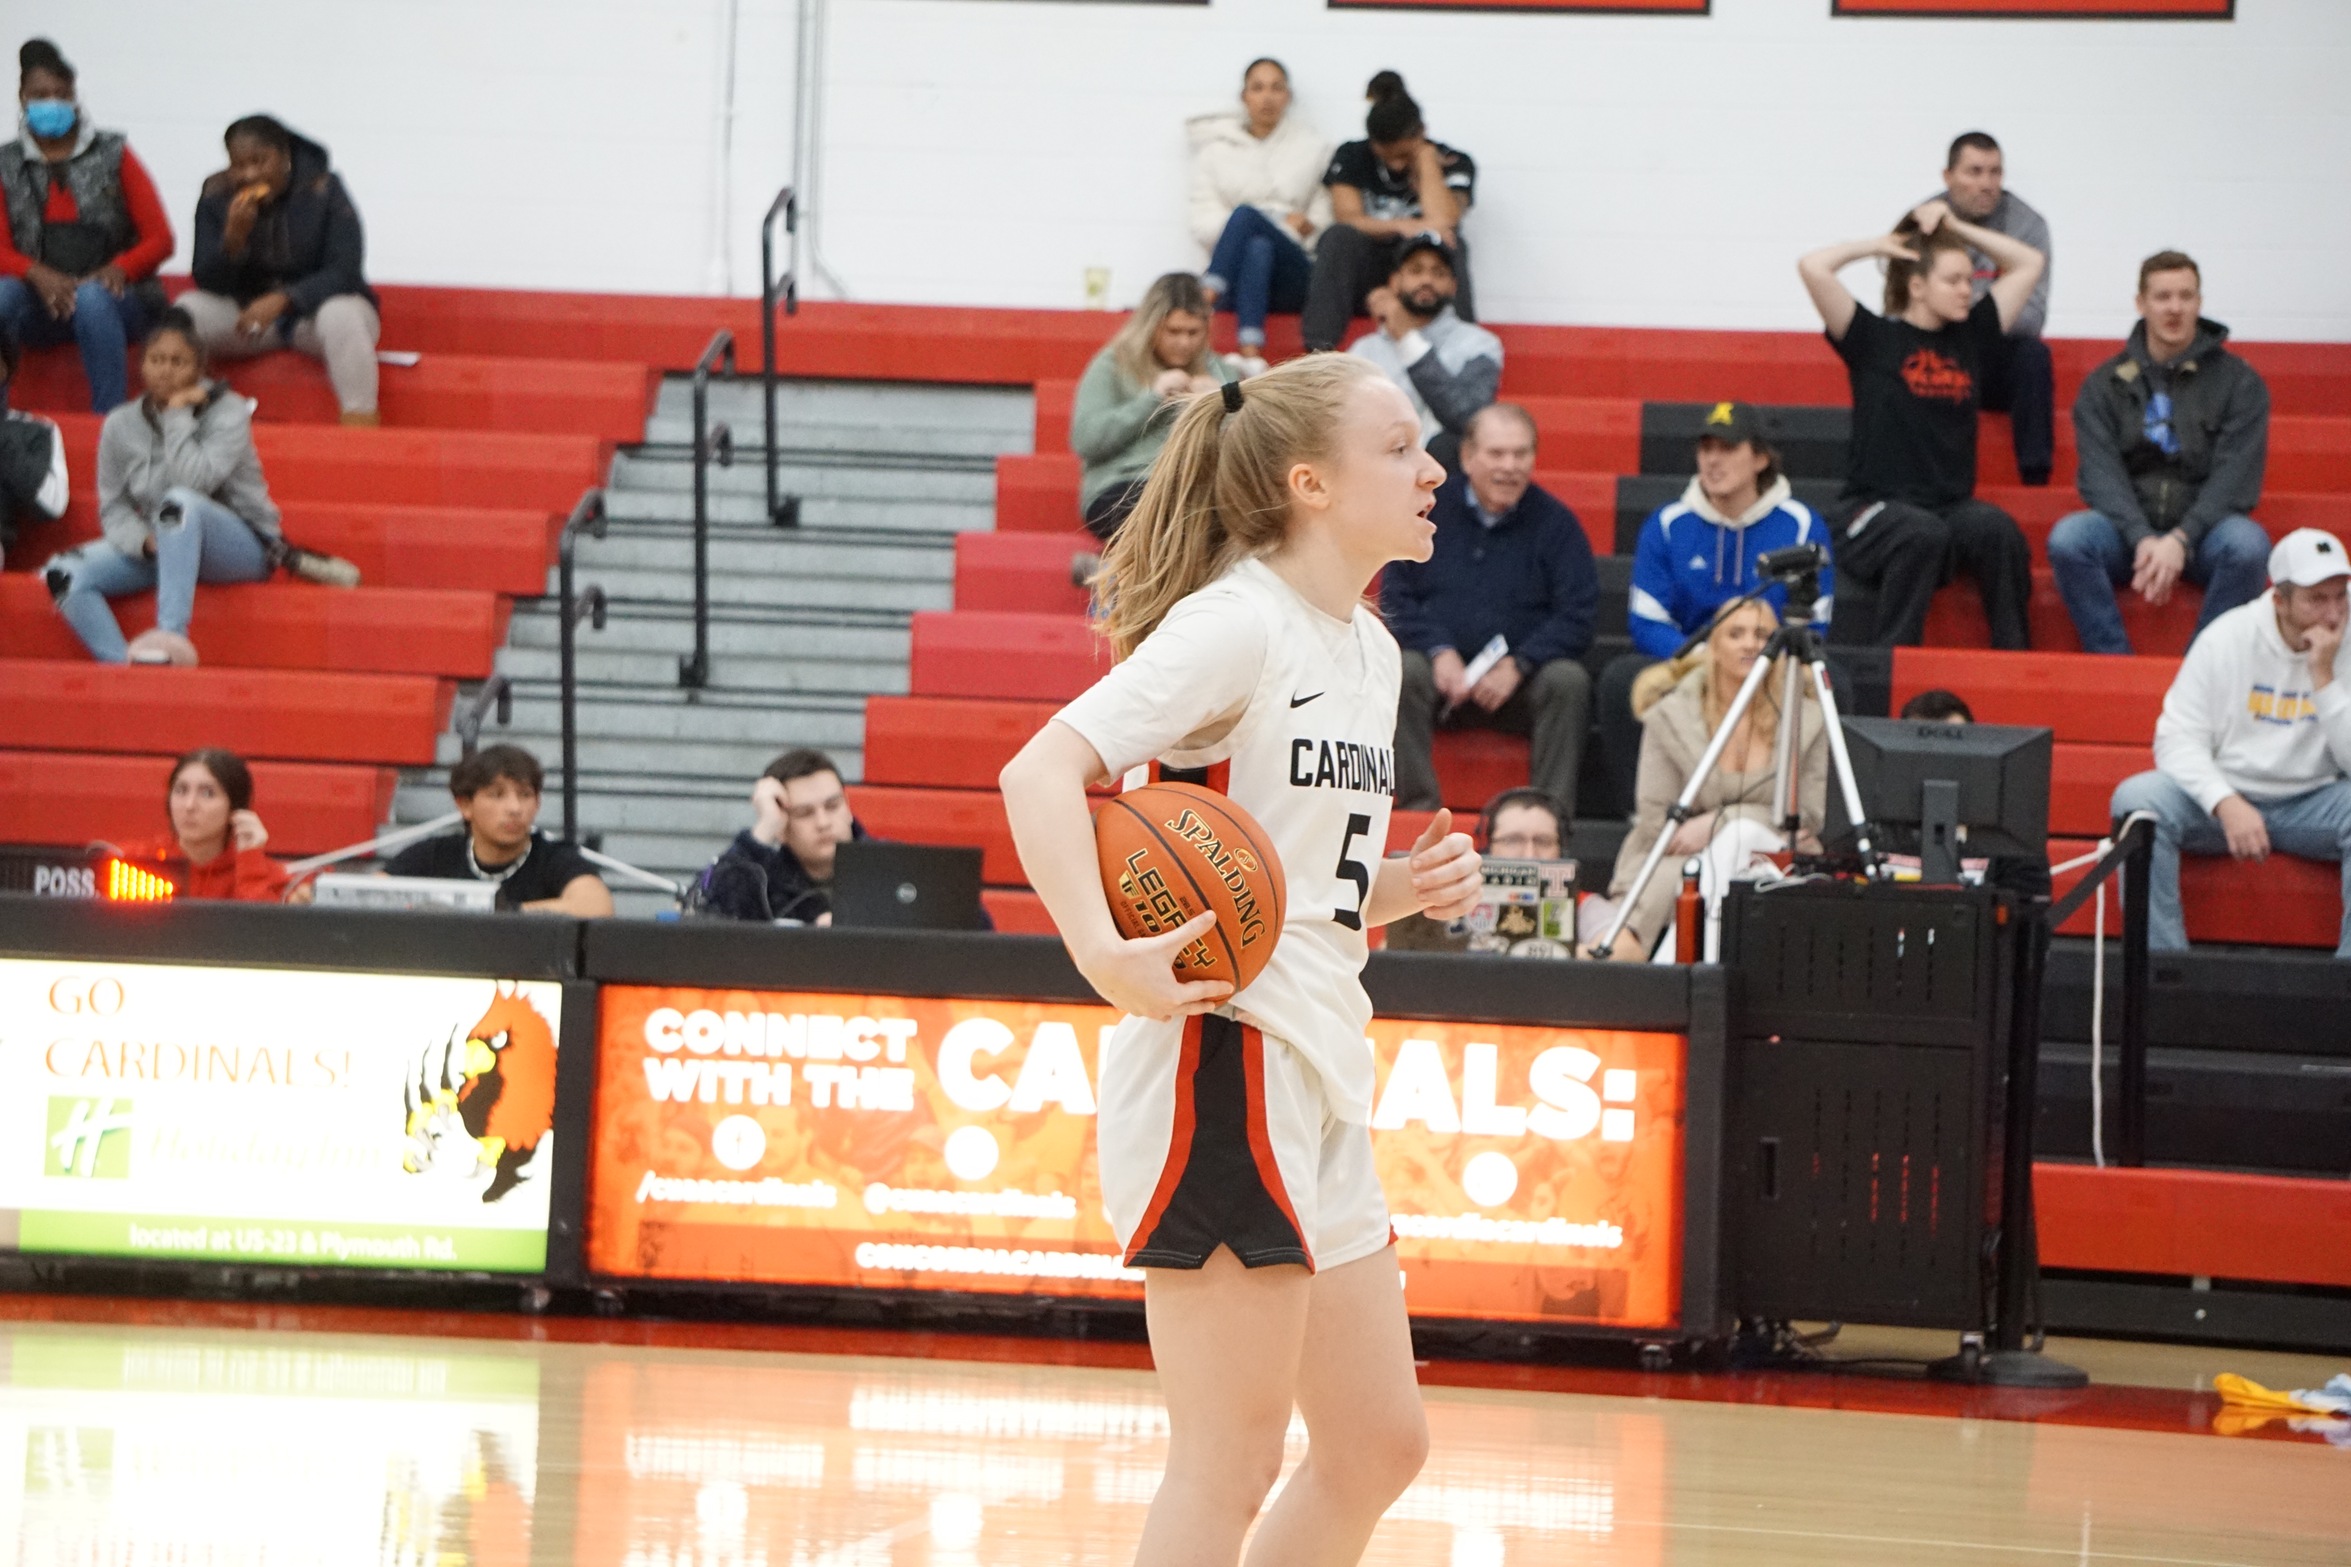 Women's Basketball secures 46-45 win over Life